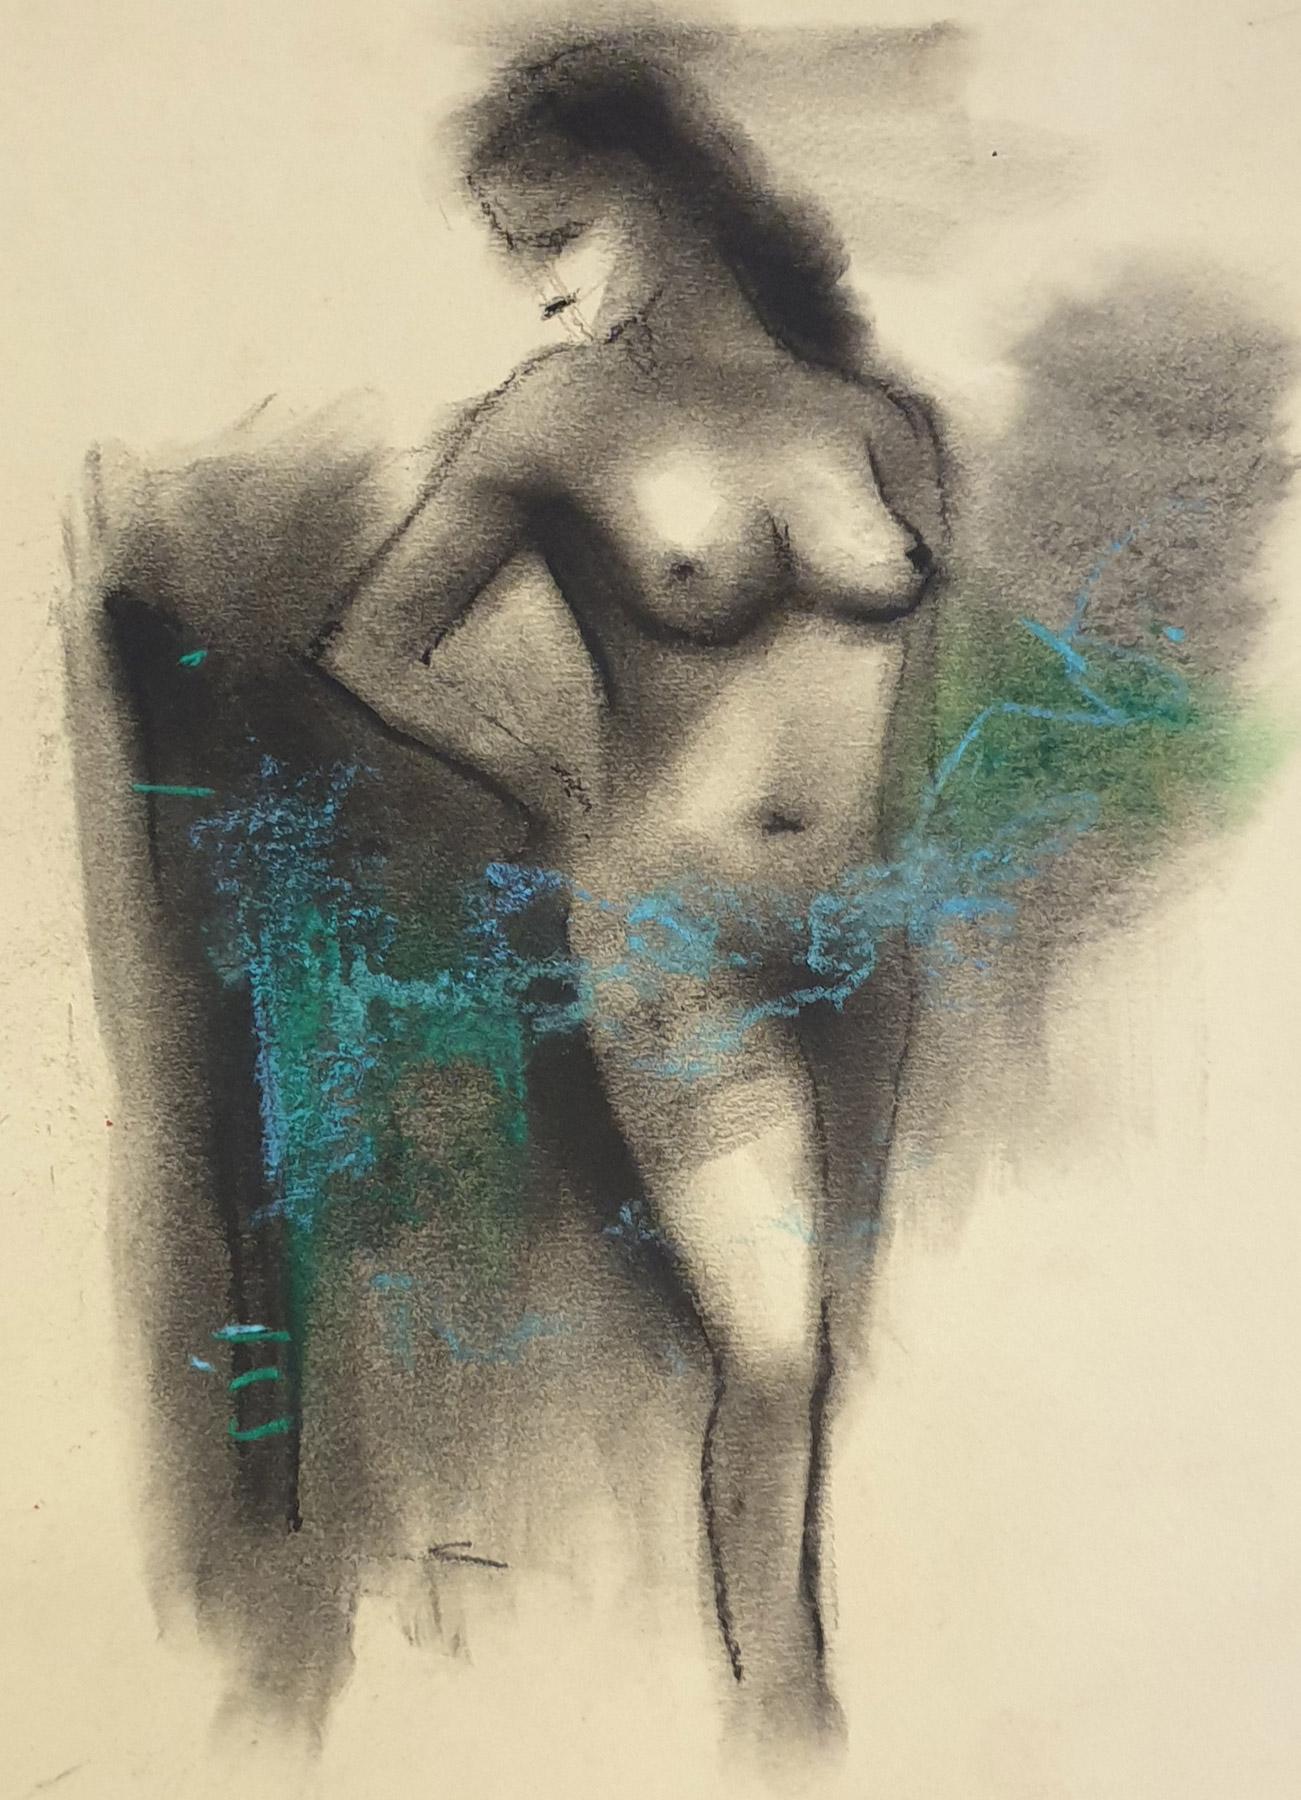 Subrata Das Nude Painting - Nude Women, Charcoal & Pastel on Board, Blue, Black colors "In Stock"